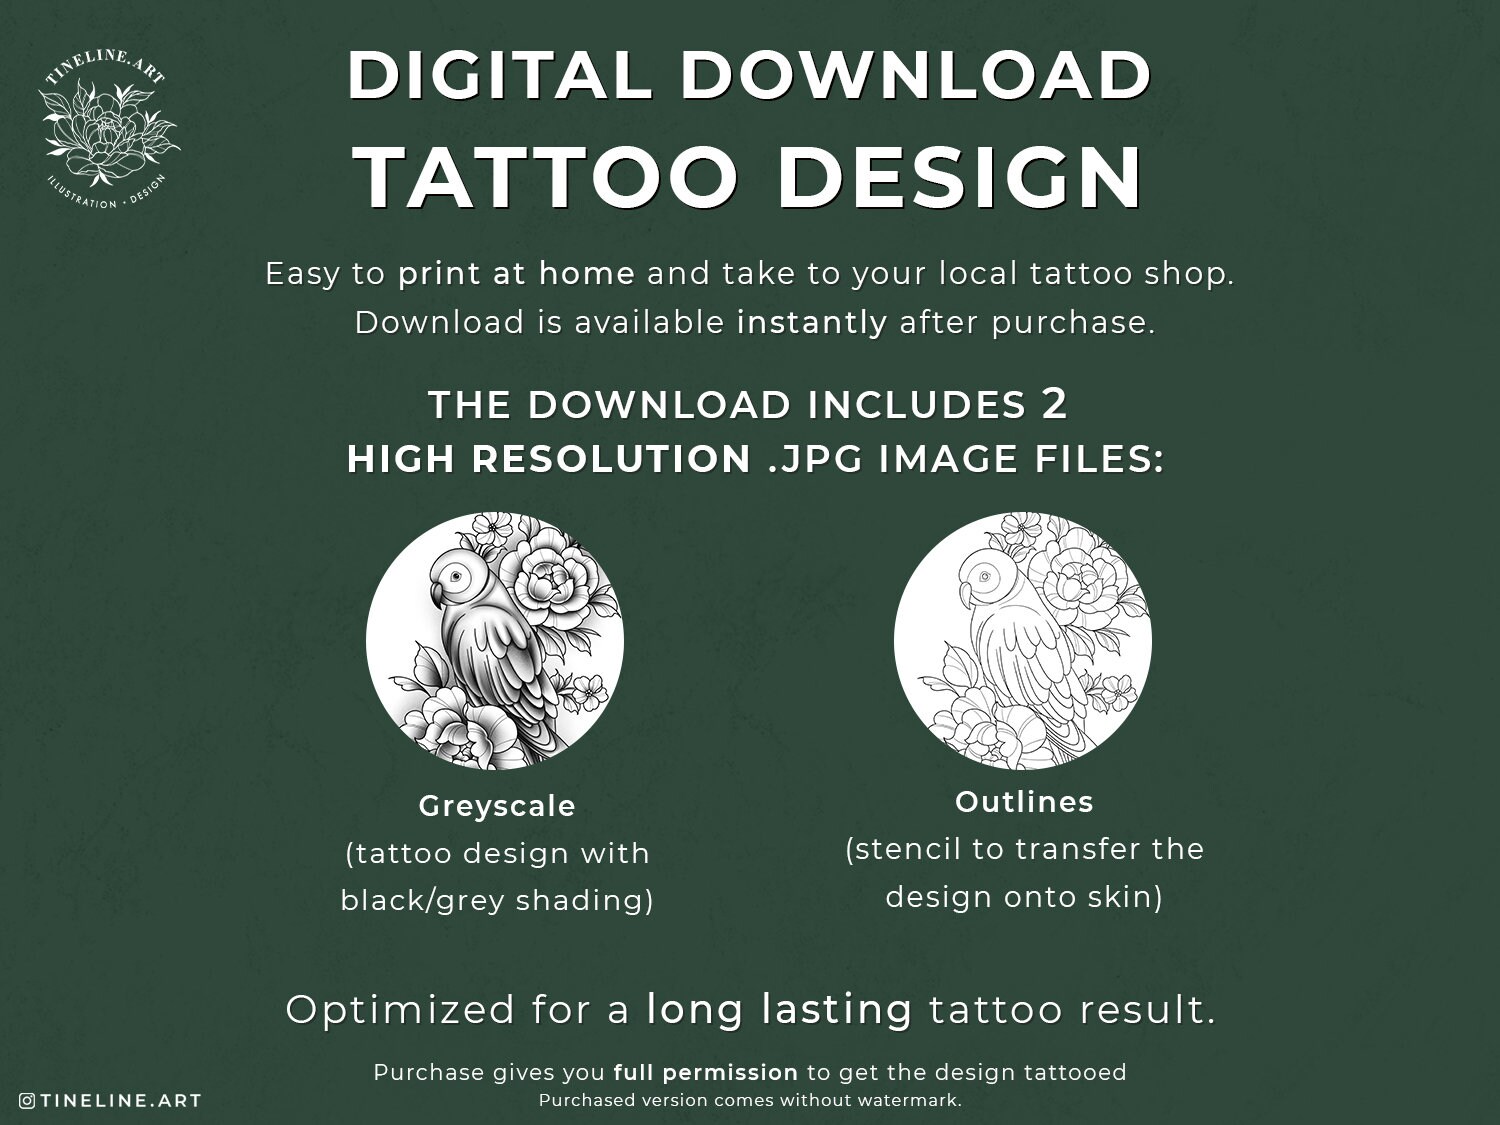 This Tattoo Design App Will Get You Inked [Review] | Cult of Mac